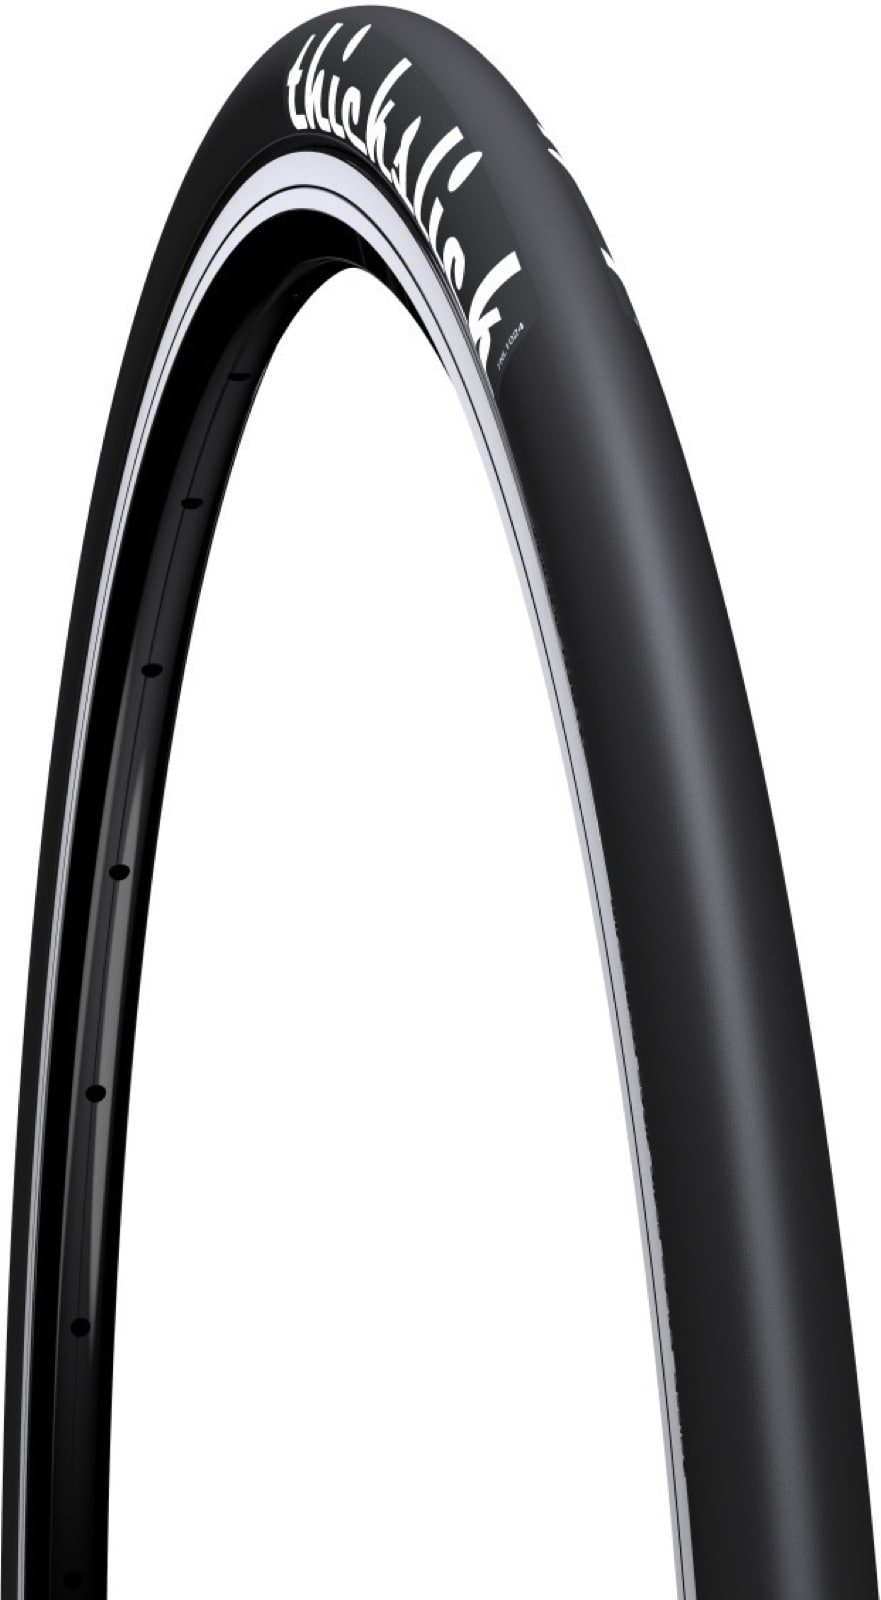 Thick Slick Ultimate Commuter Bicycle Tire